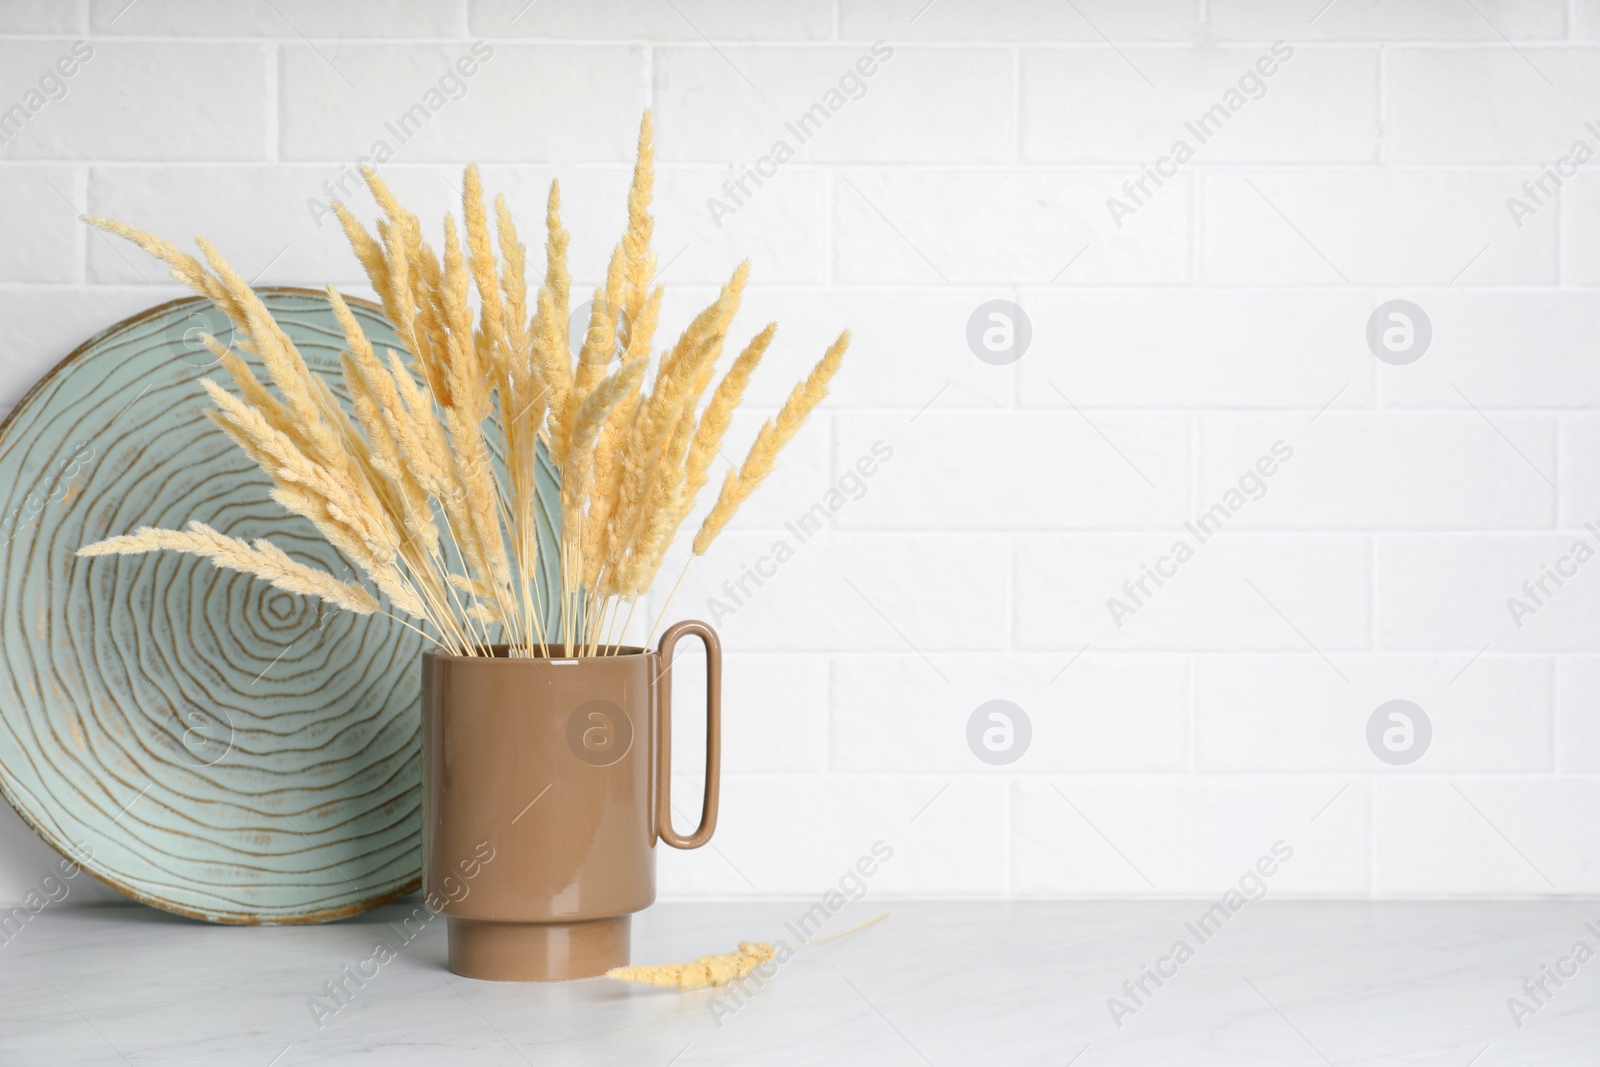 Photo of Ceramic vase with fluffy dry plants and decorative plate on light table near white brick wall. Space for text